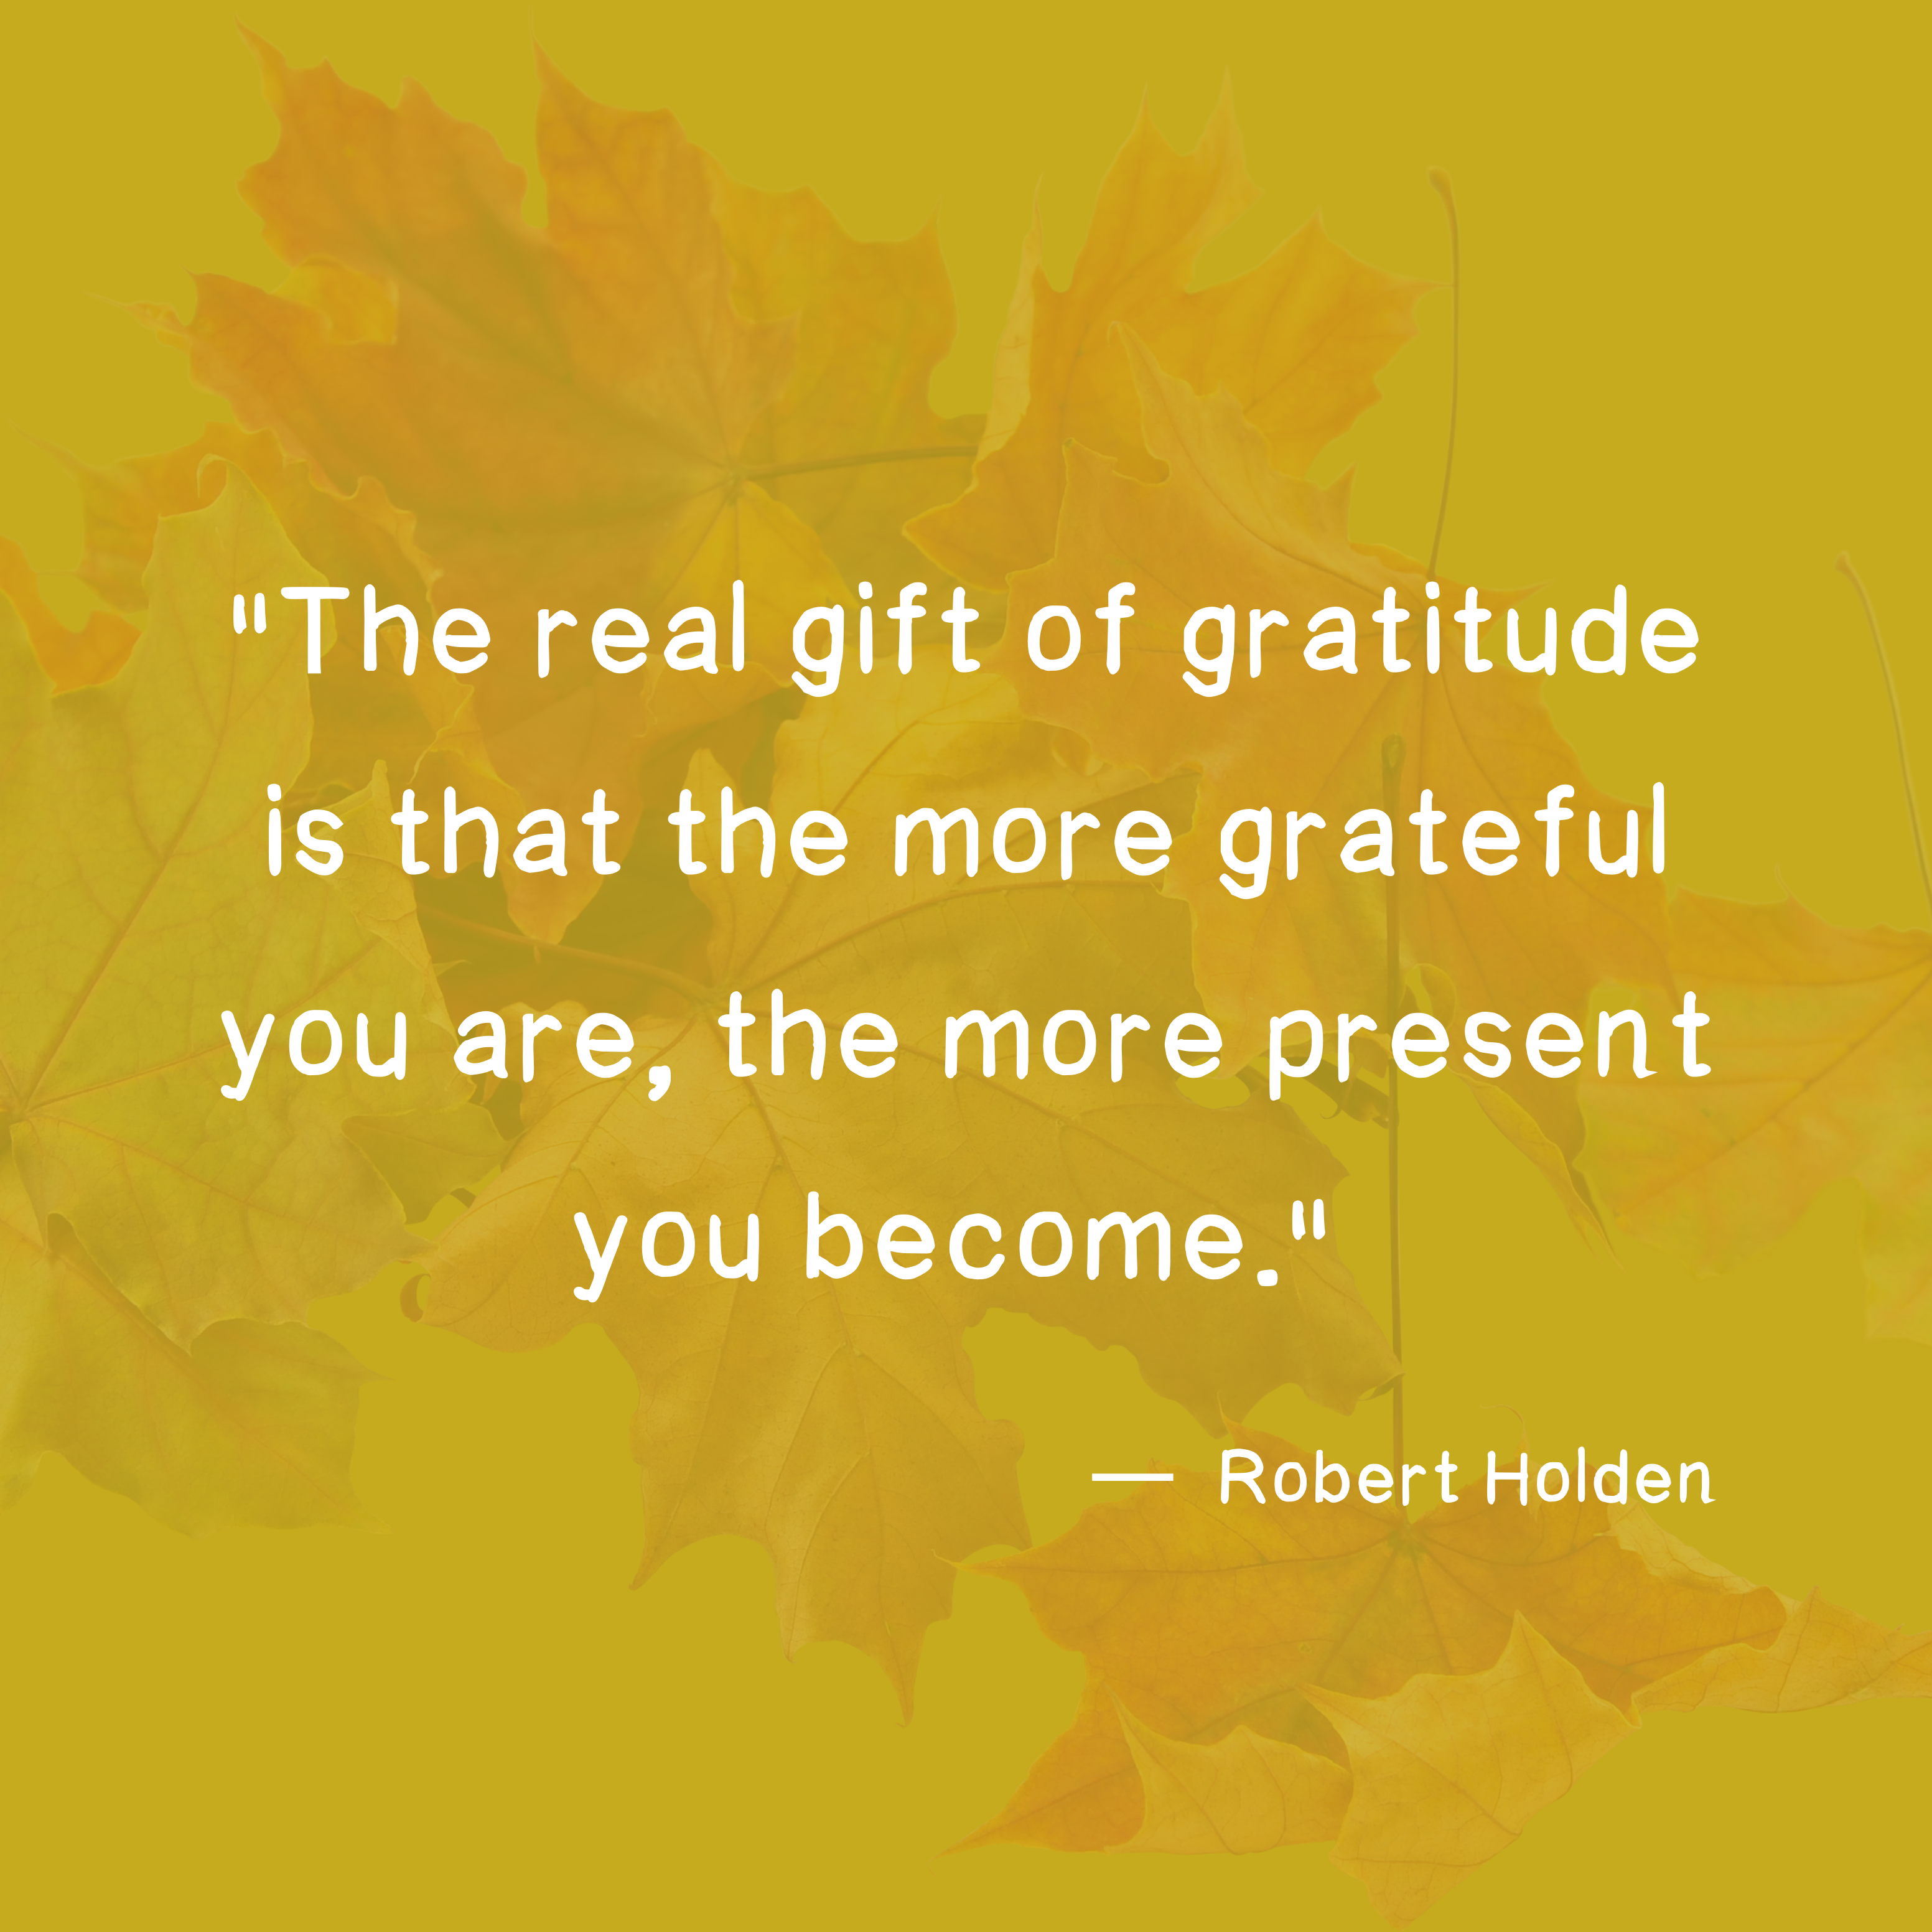 Practicing Gratitude has been associated with Physical, Mental, and Emotional Health Benefits.